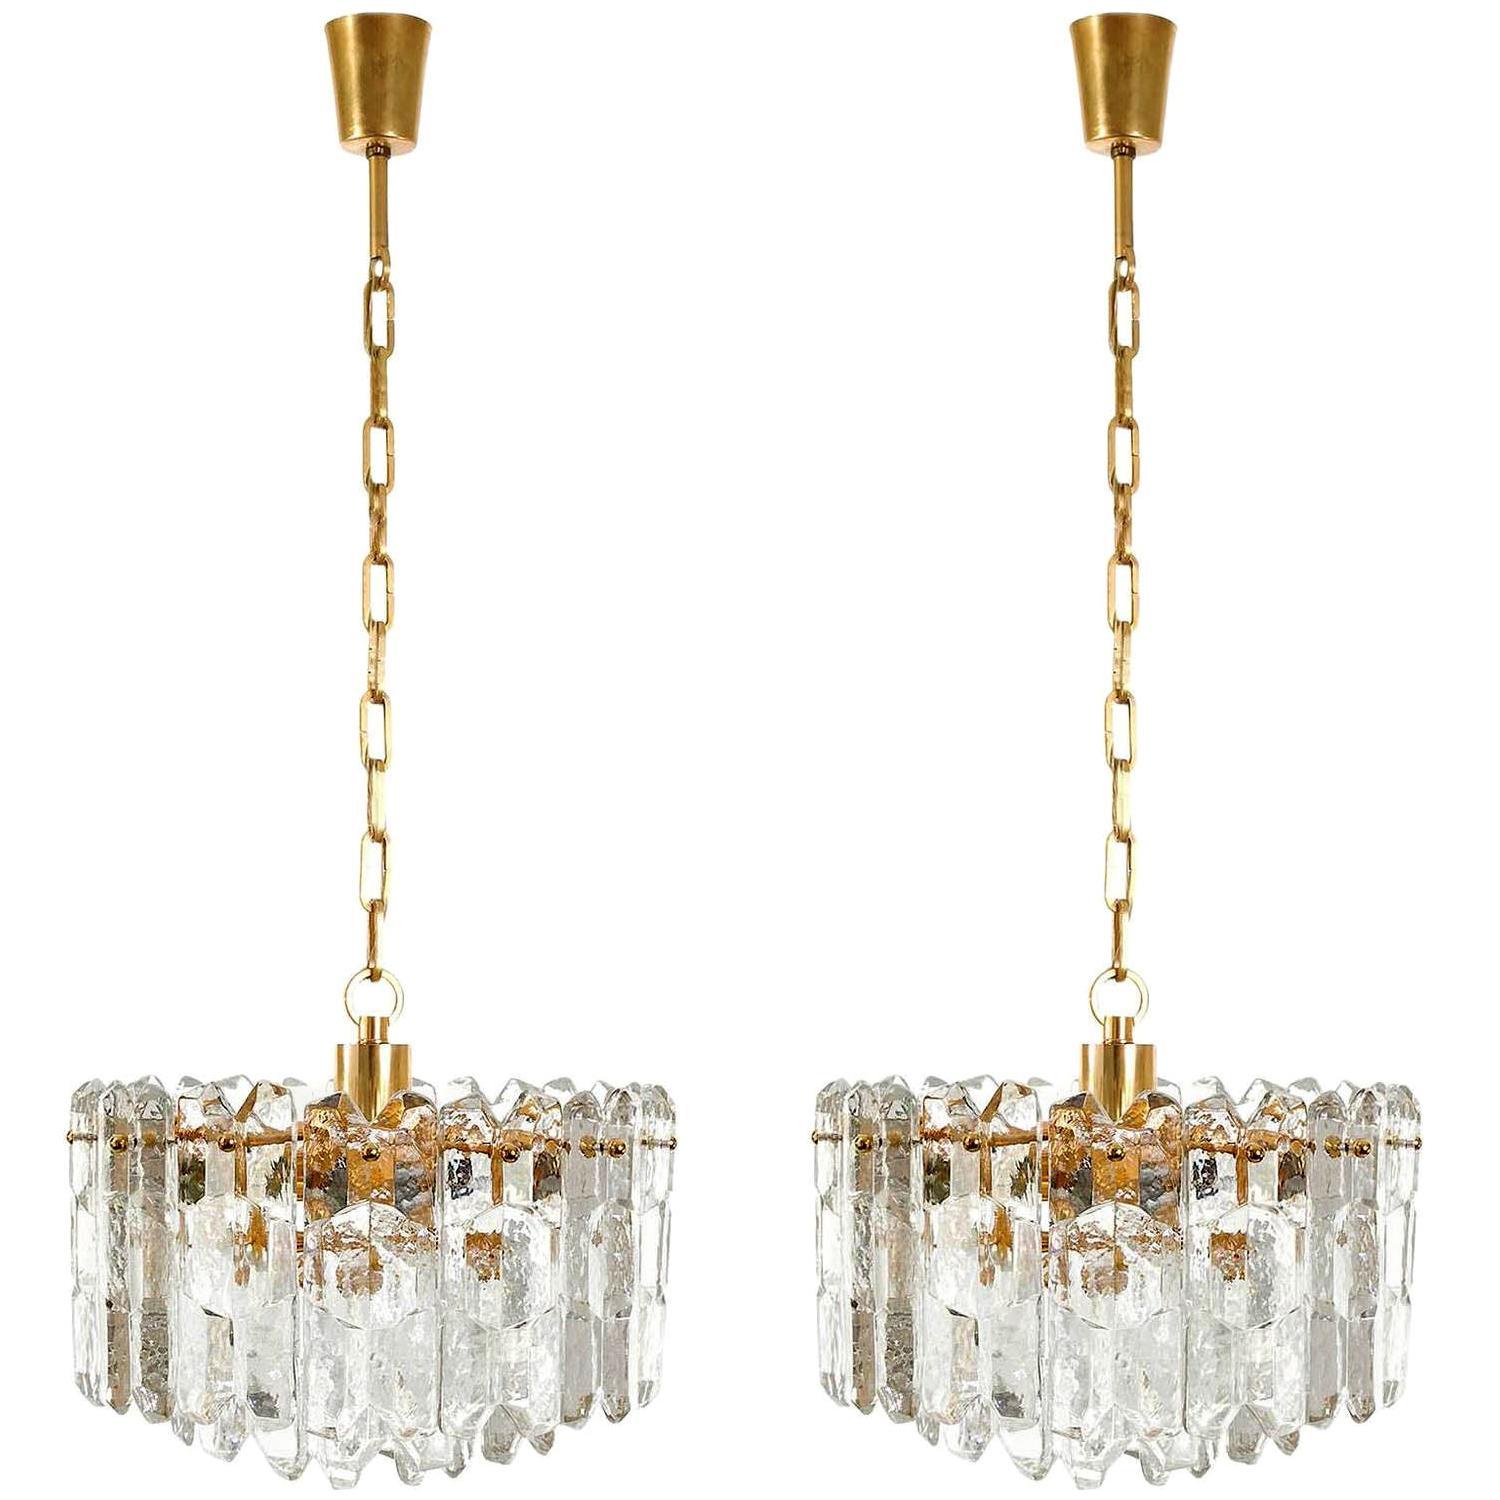 One of Two Chandeliers Pendant Lights 'Palazzo' by Kalmar, Gilt Brass Glass 1970